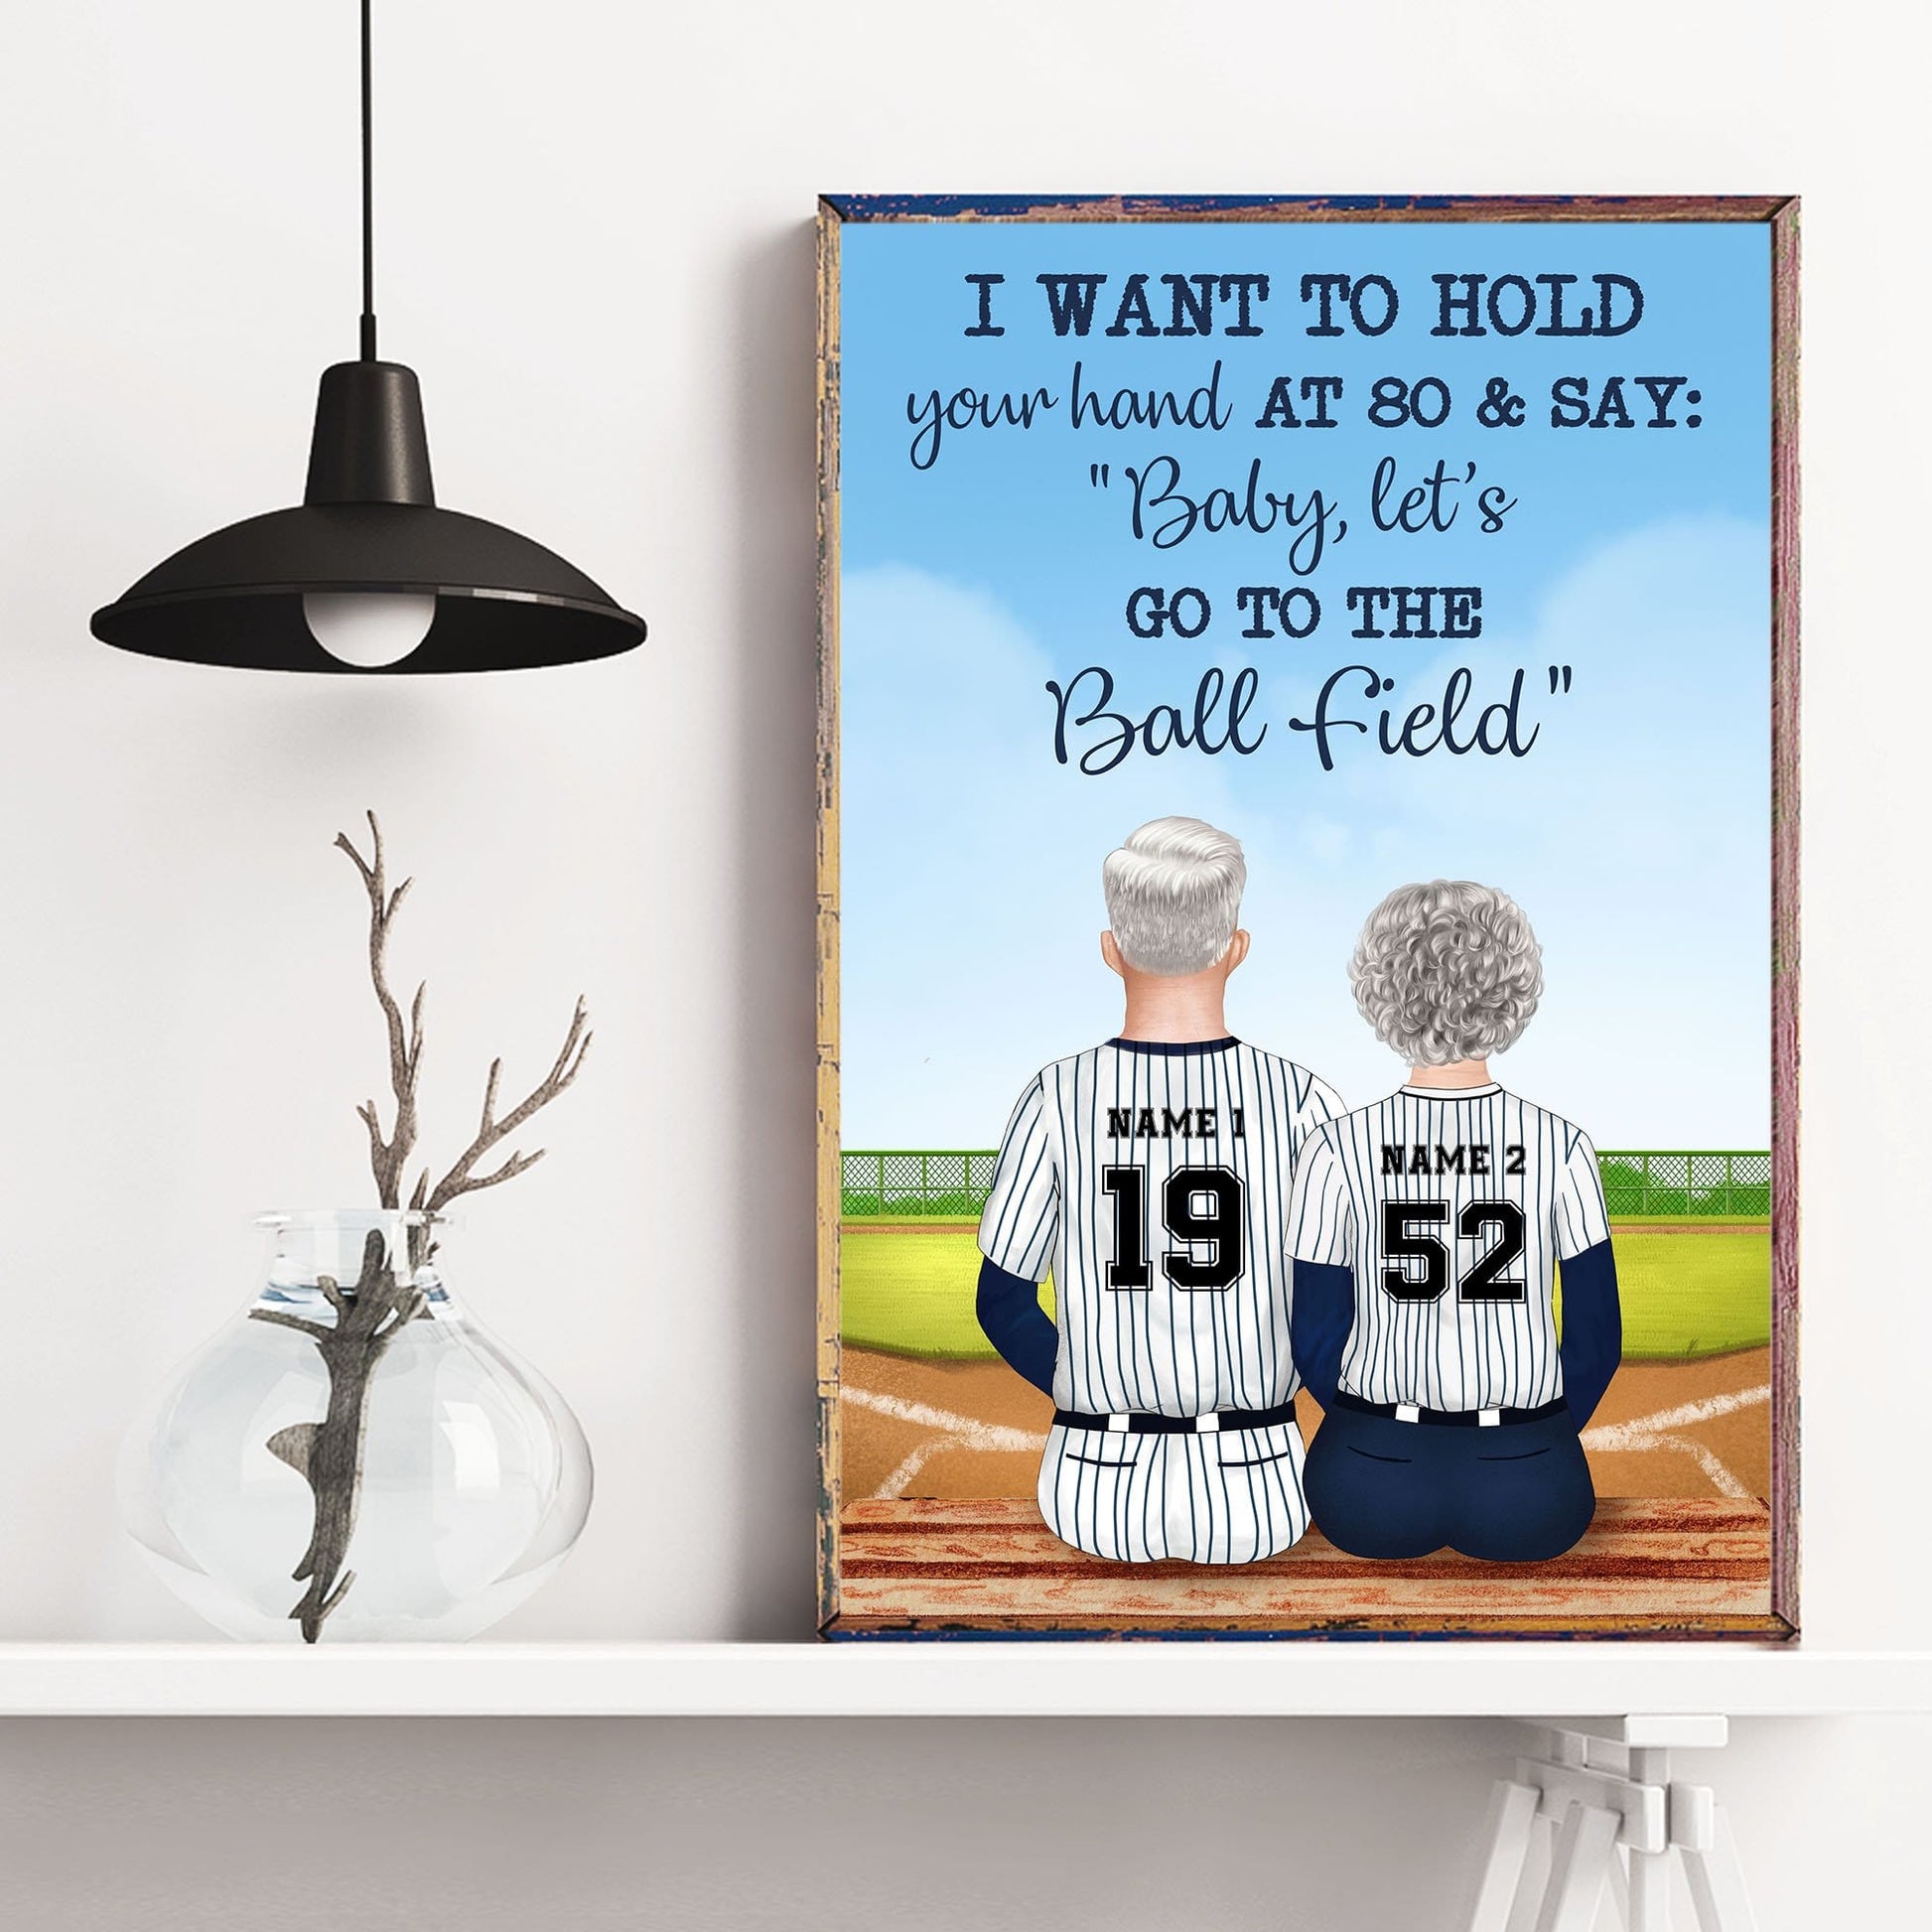 I Want To Hold Your Hand At 80 & Say: "Baby, Let's Go To The Ball Field" Canvas & Poster-Macorner